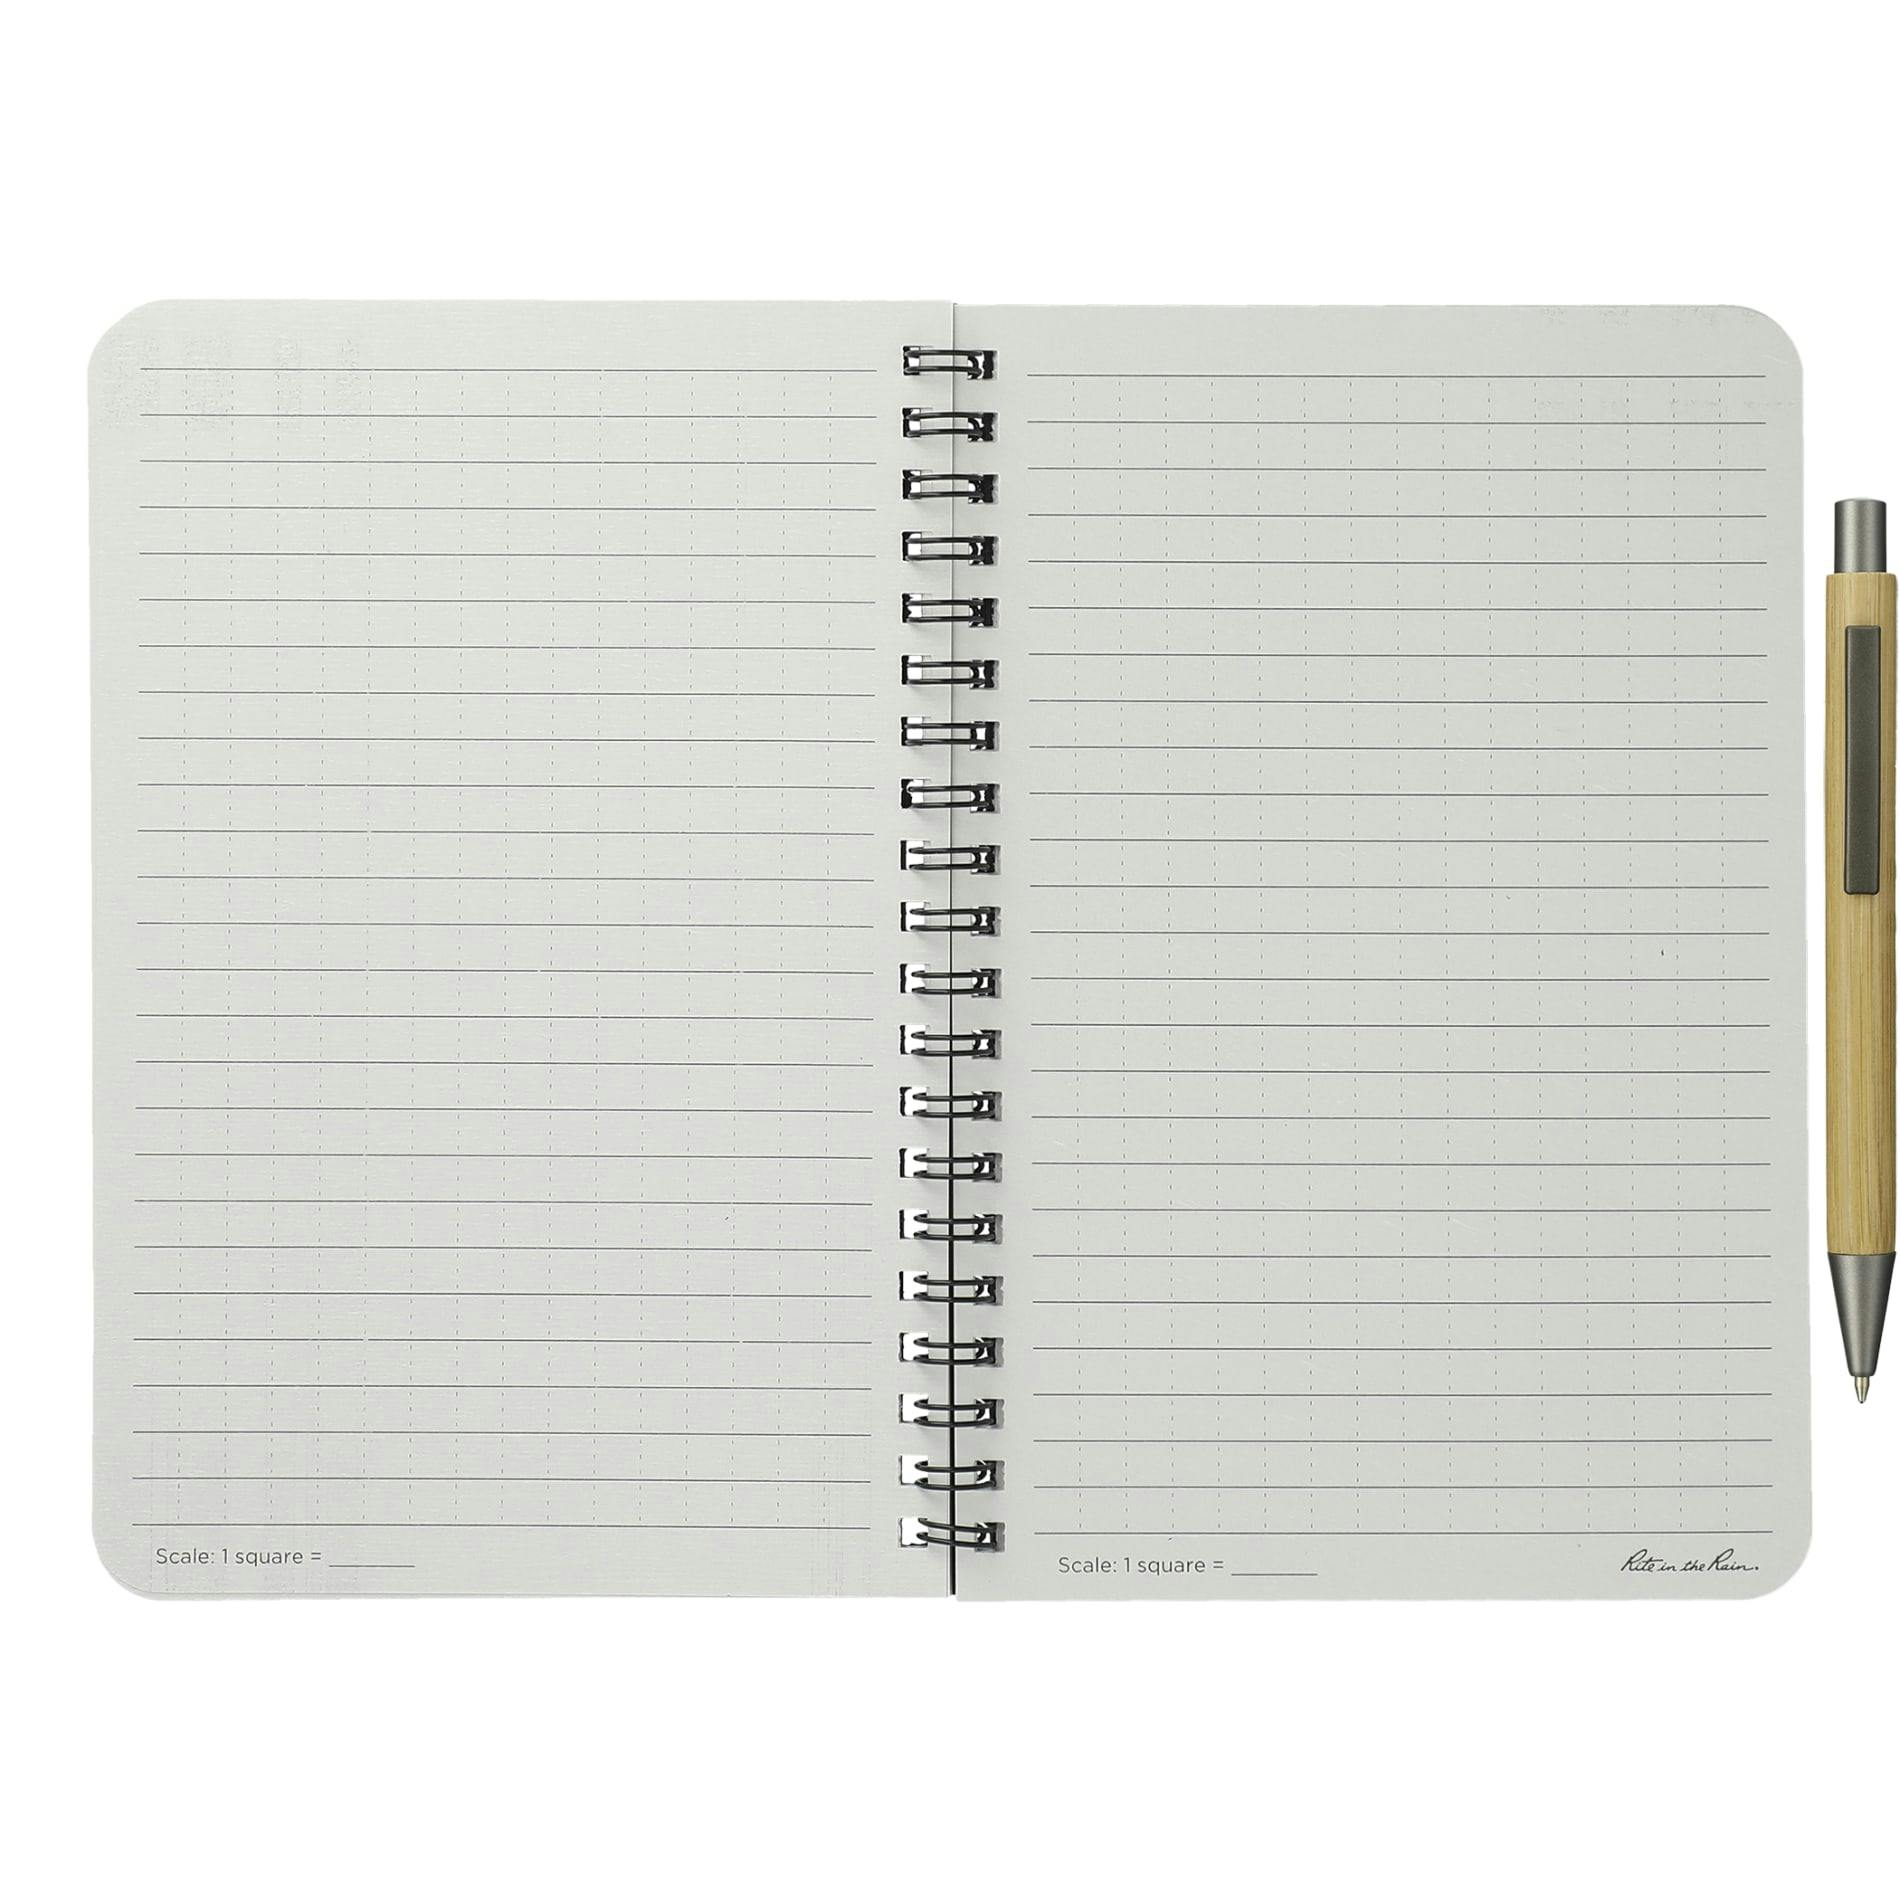 4.6” x 7” Rite in the Rain Side Spiral Notebook - additional Image 7